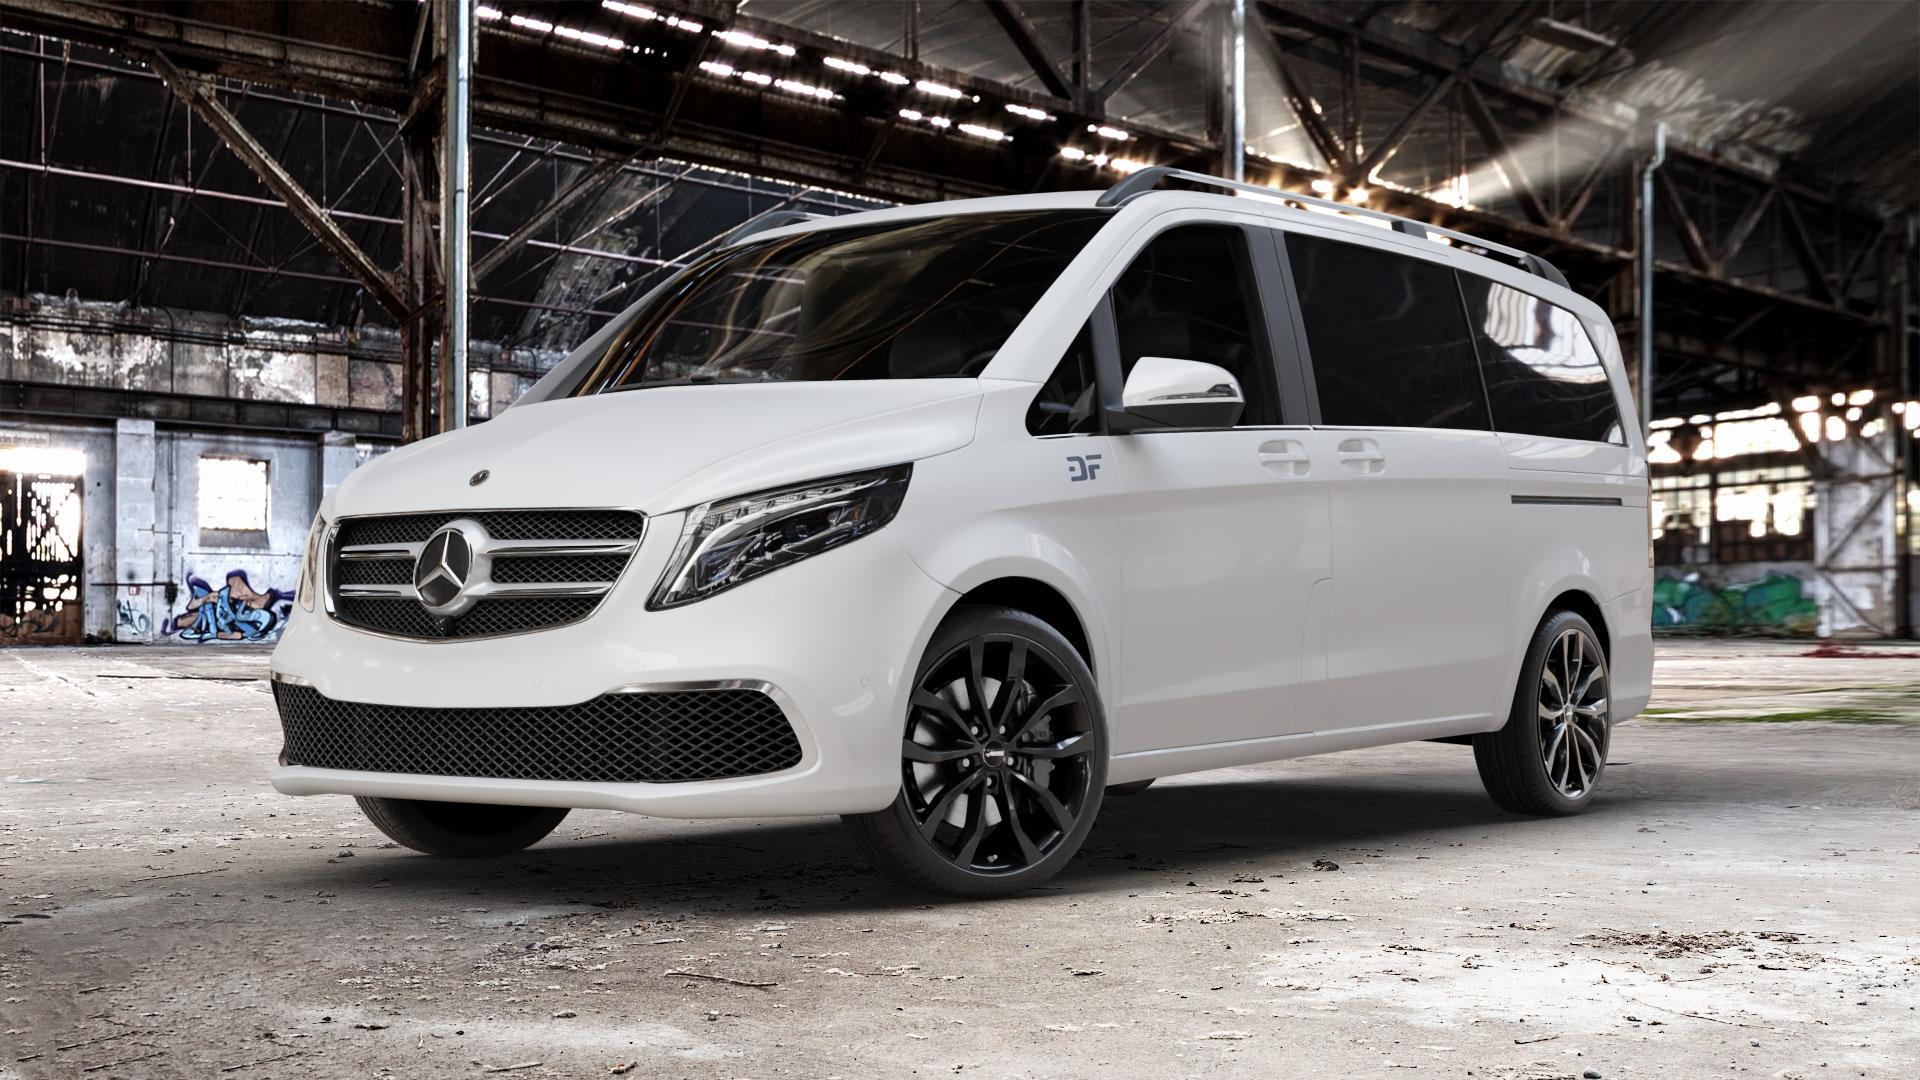 Mercedes Vito Kasten Type W447 Facelift 1,8l 114d 100kW (136 hp) Wheels and  Tyre Packages